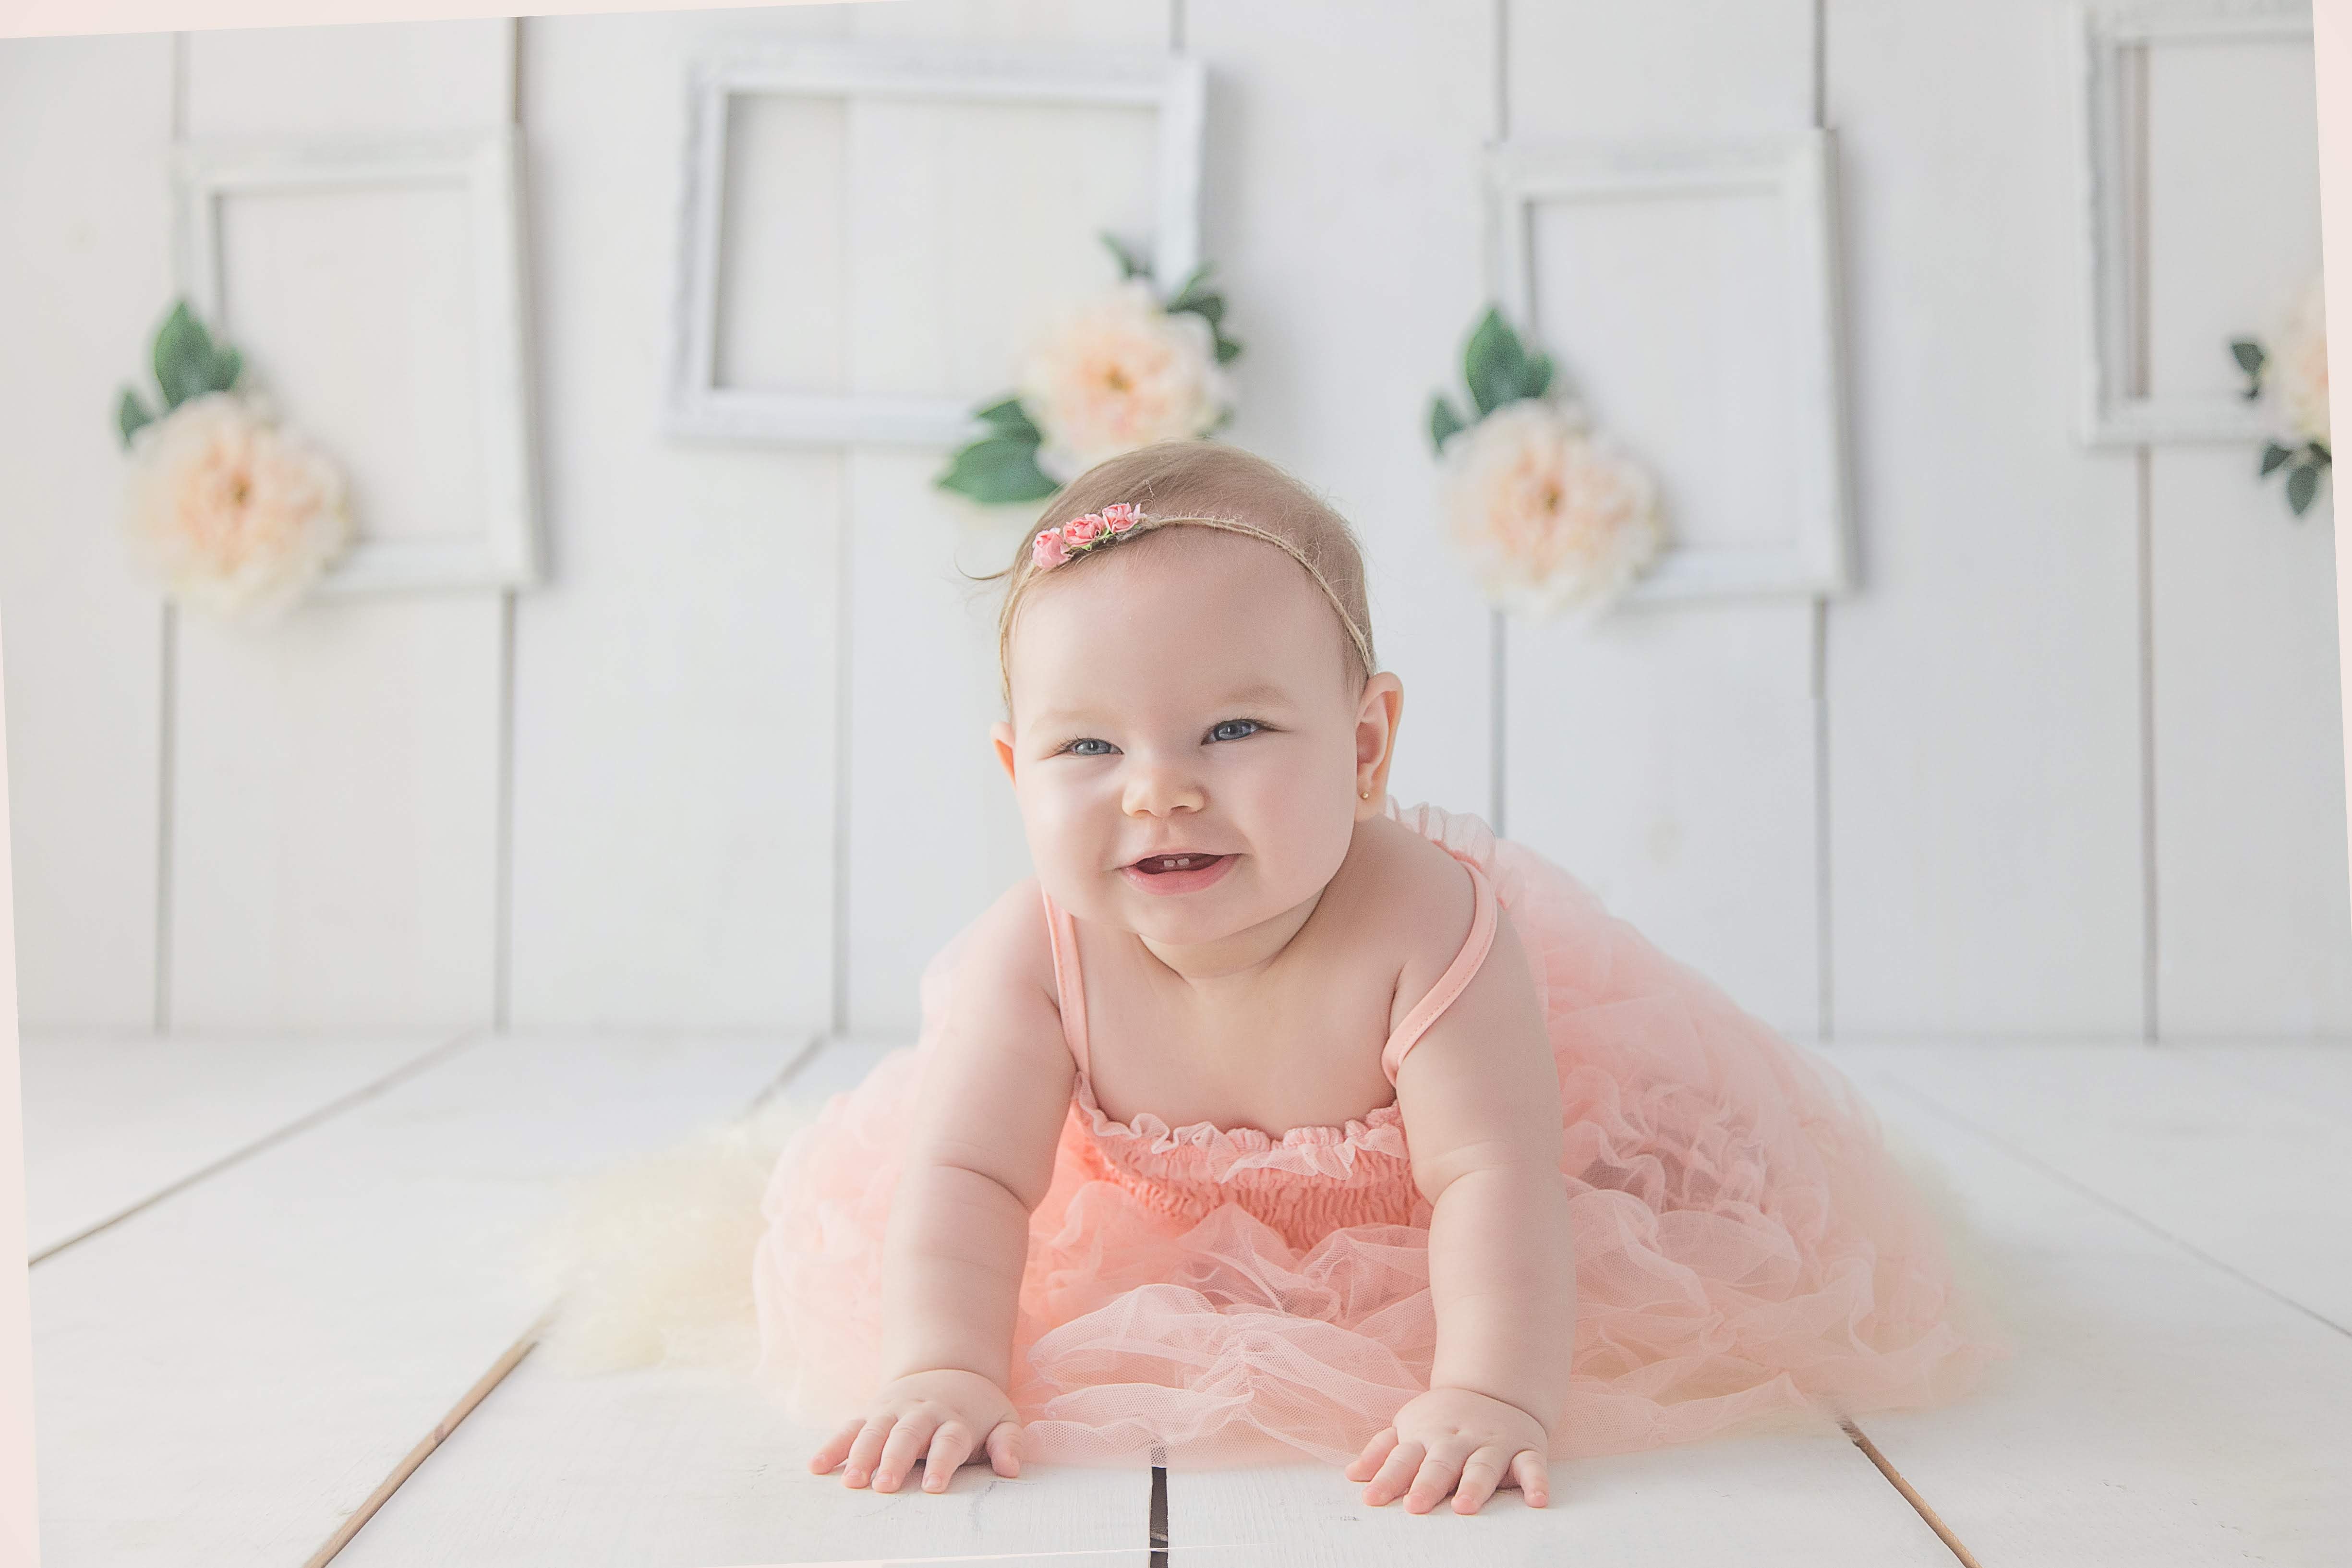 re you looking for a name for your baby girl that has a special significance? This guide will give you seven tips on how to choose a name with deep meaning